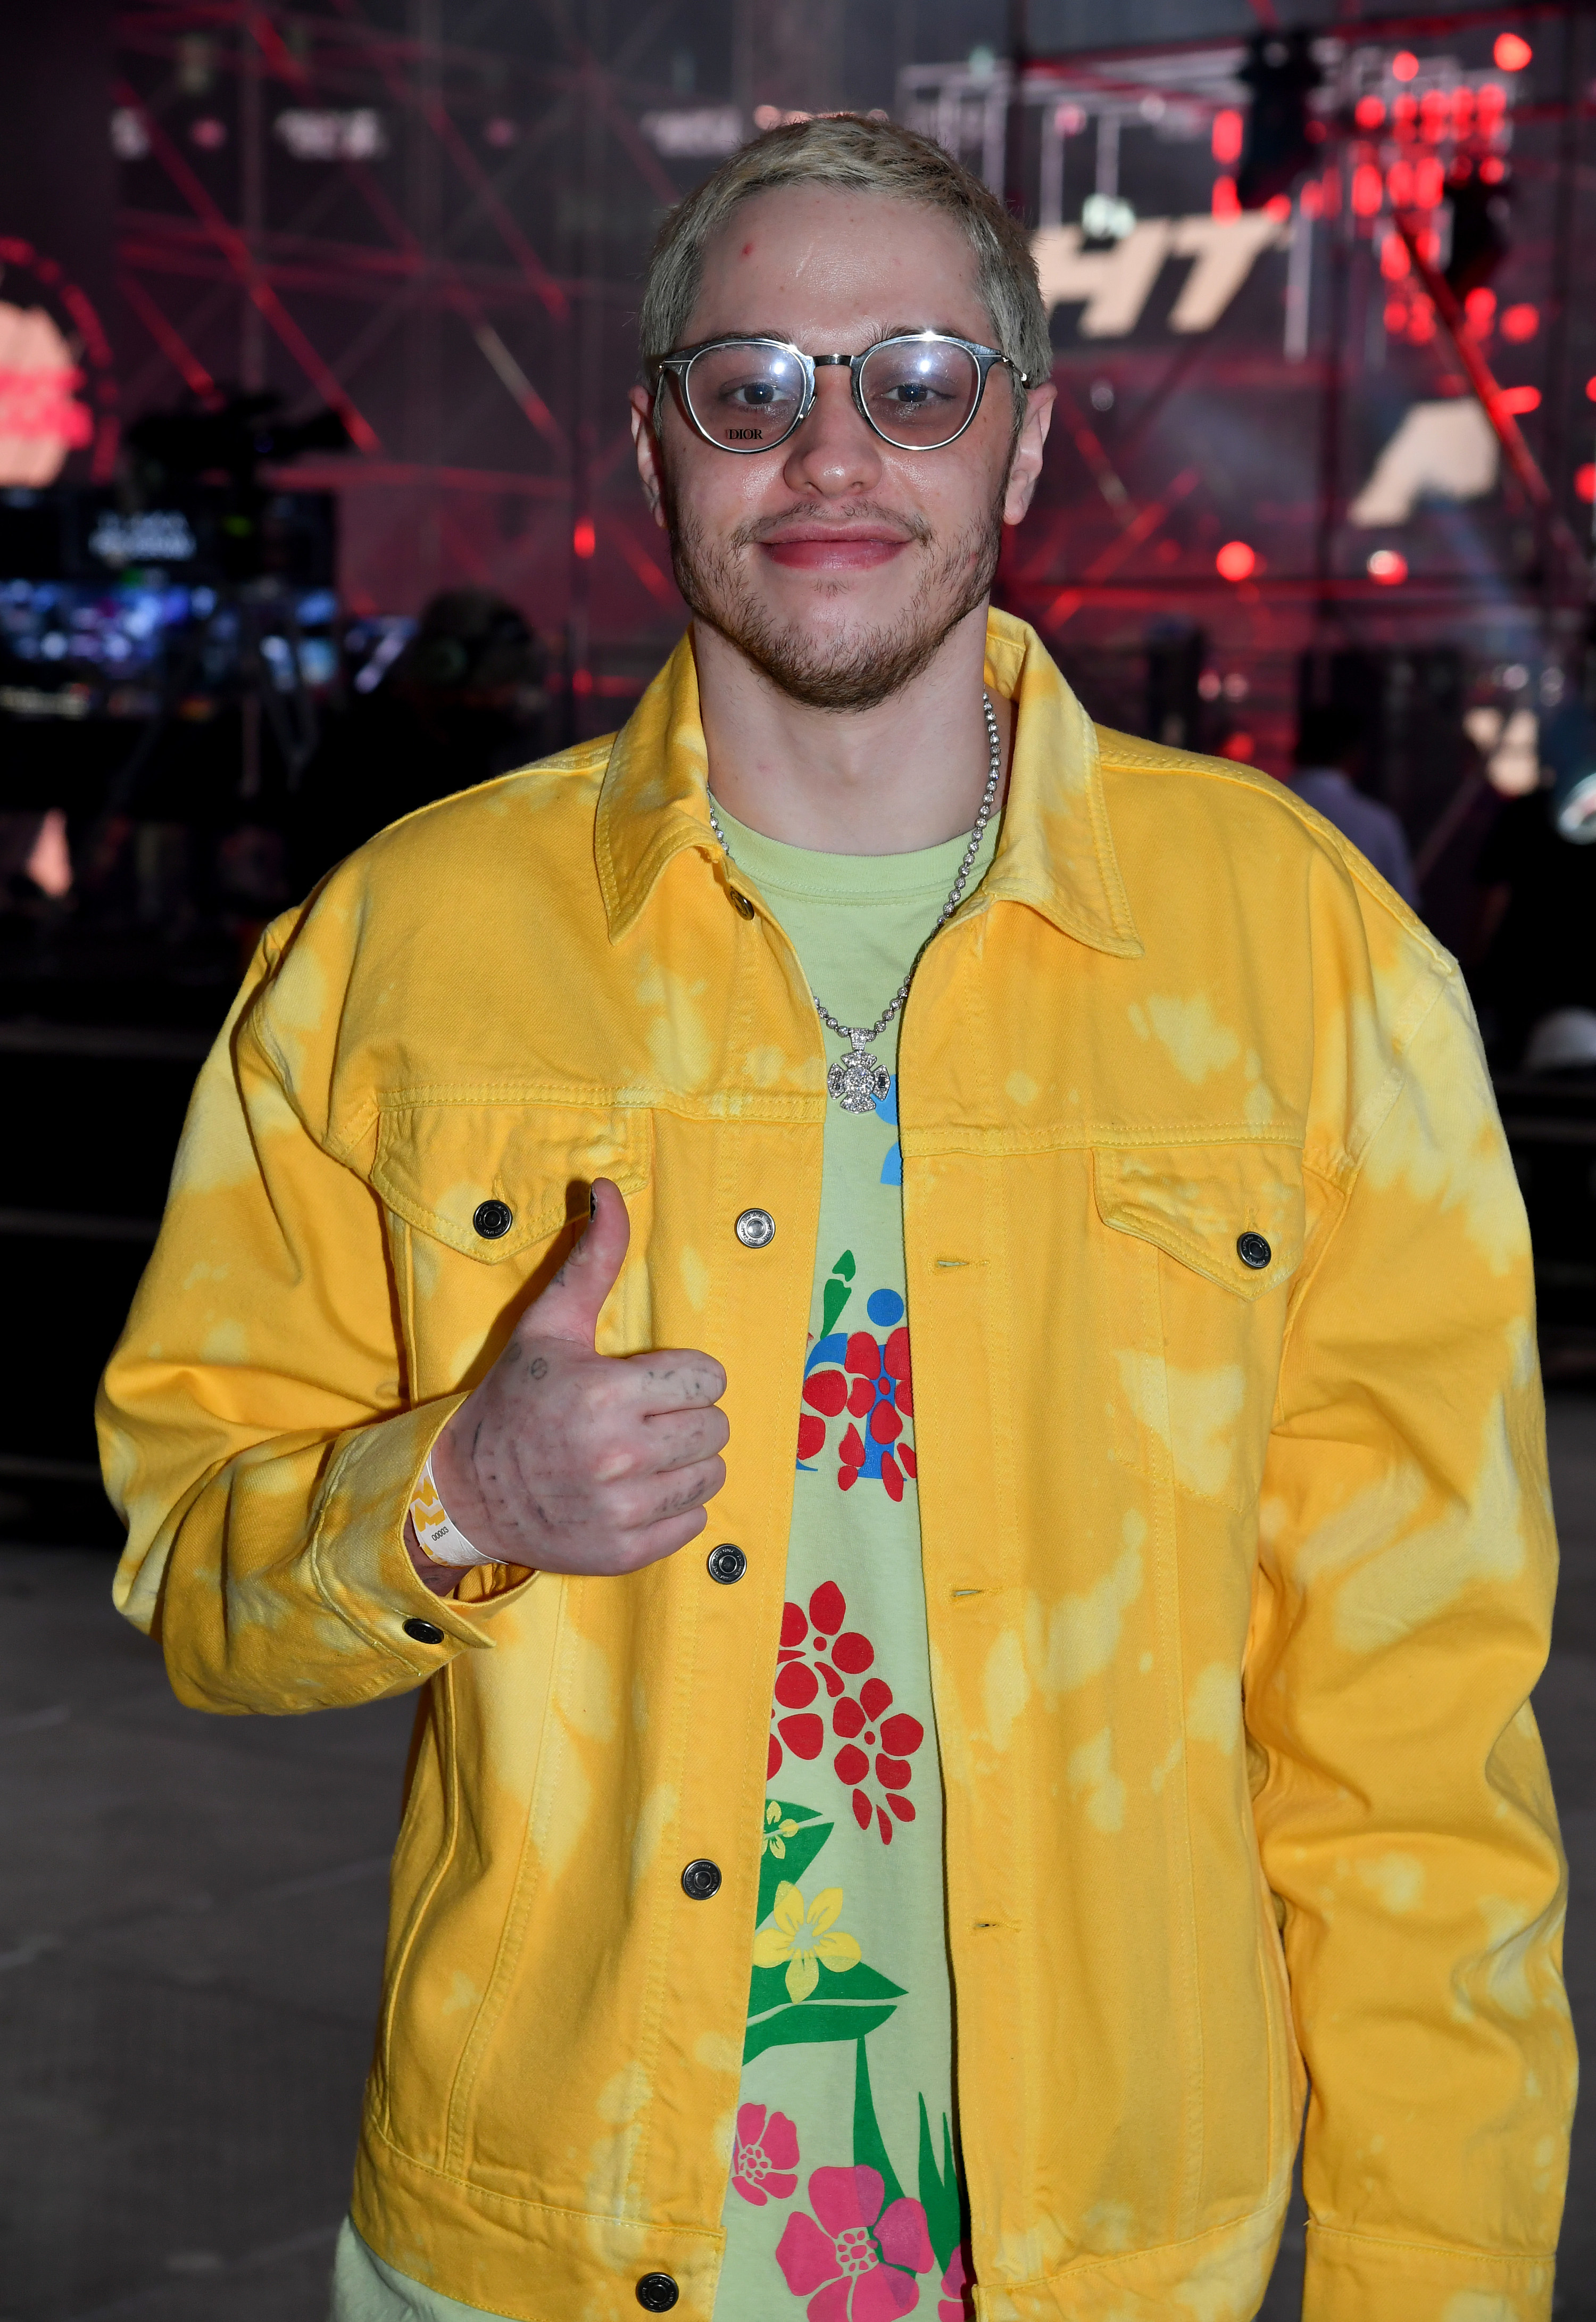 Pete Davidson is photographed giving a thumbs up